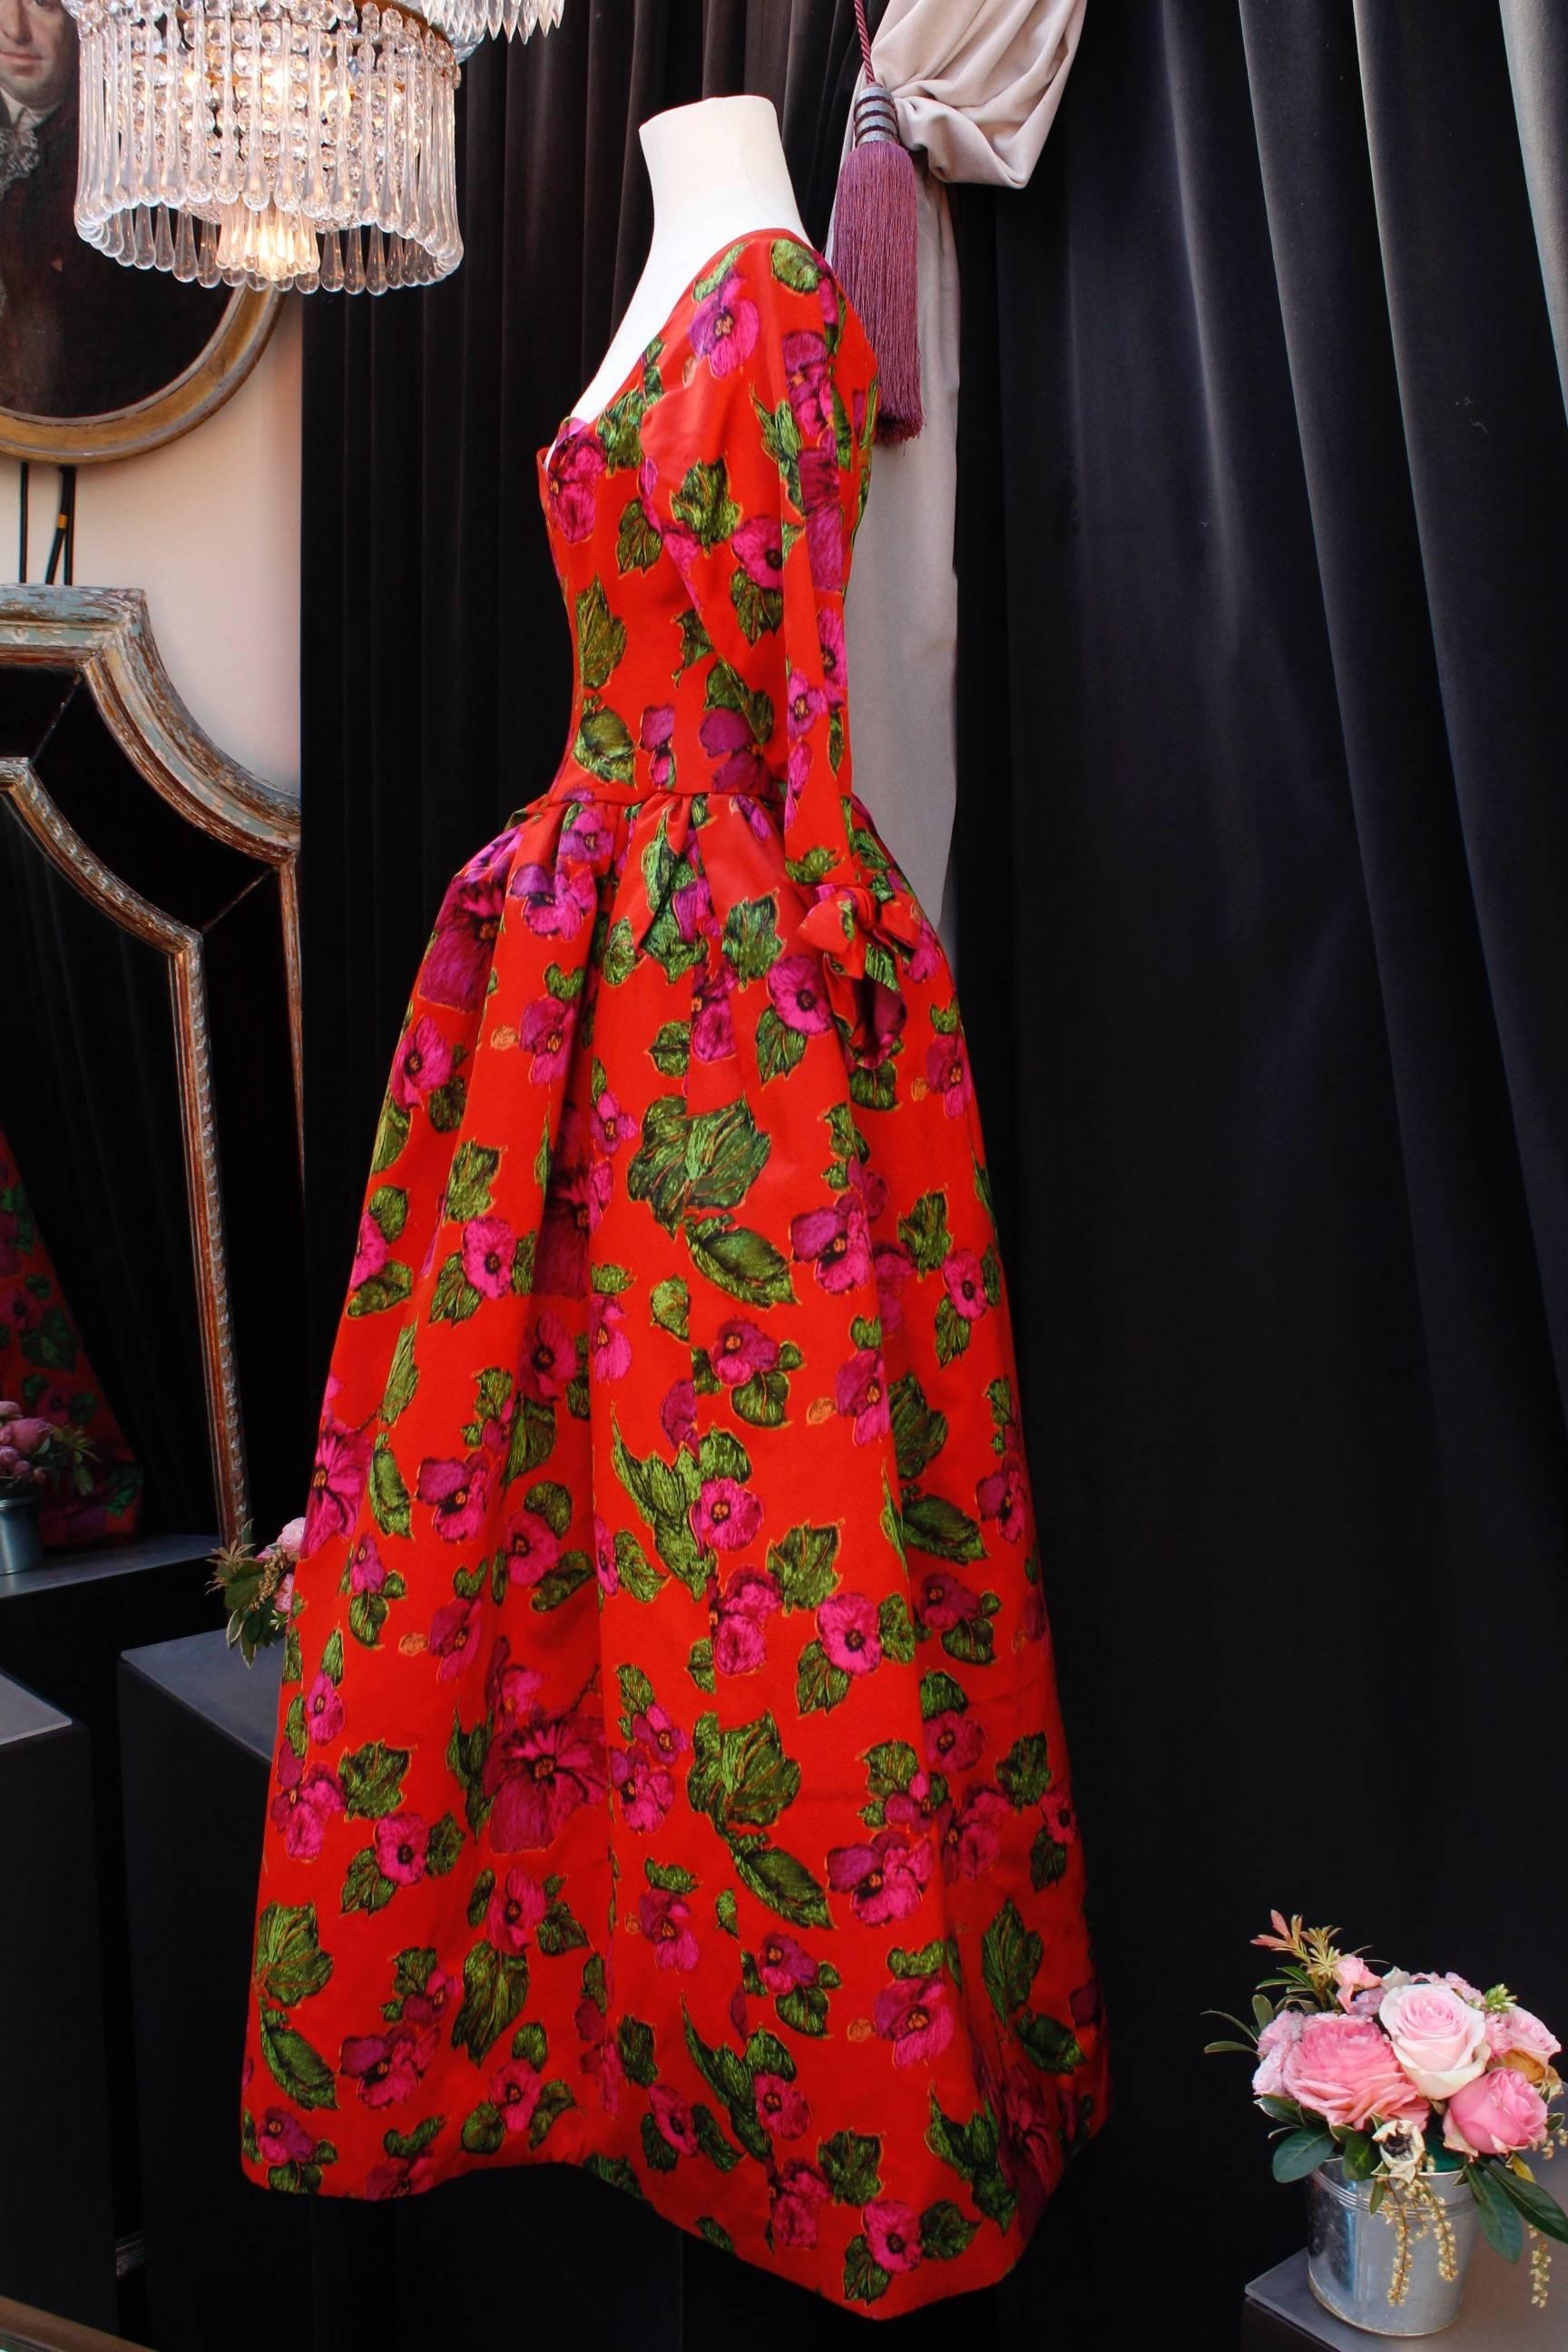 NINA RICCI (Made in France) Stunning opera dress composed of orange red silk taffeta. The top features a close-fitting cut with a heart-shaped neck and long tight sleeves with a bow on their cuffs. The gored skirt is flared, from the waist to the